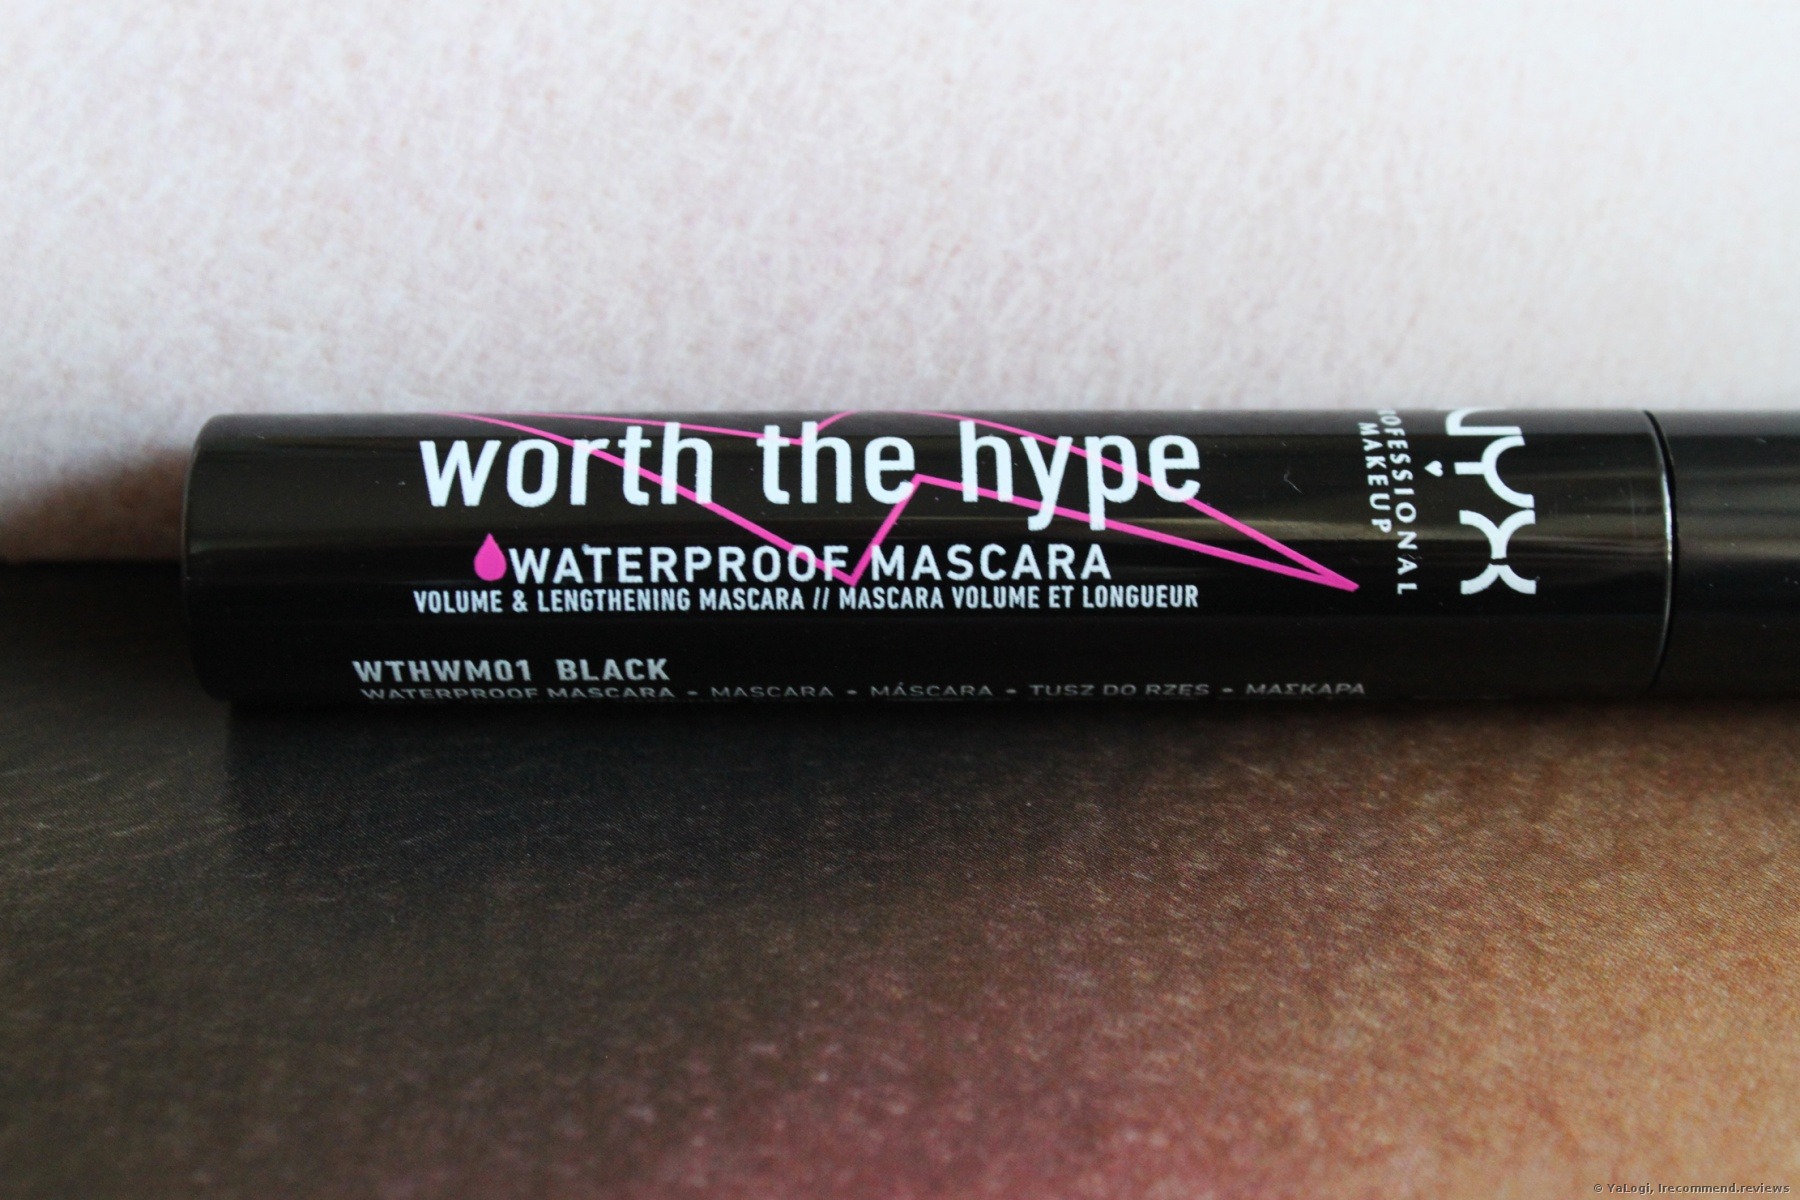 awesome. mascara BEFORE/AFTER Worth never NYX good Mascara really Consumer shots worth The Hype is Waterproof reviews it «Is hype? This the | - but »